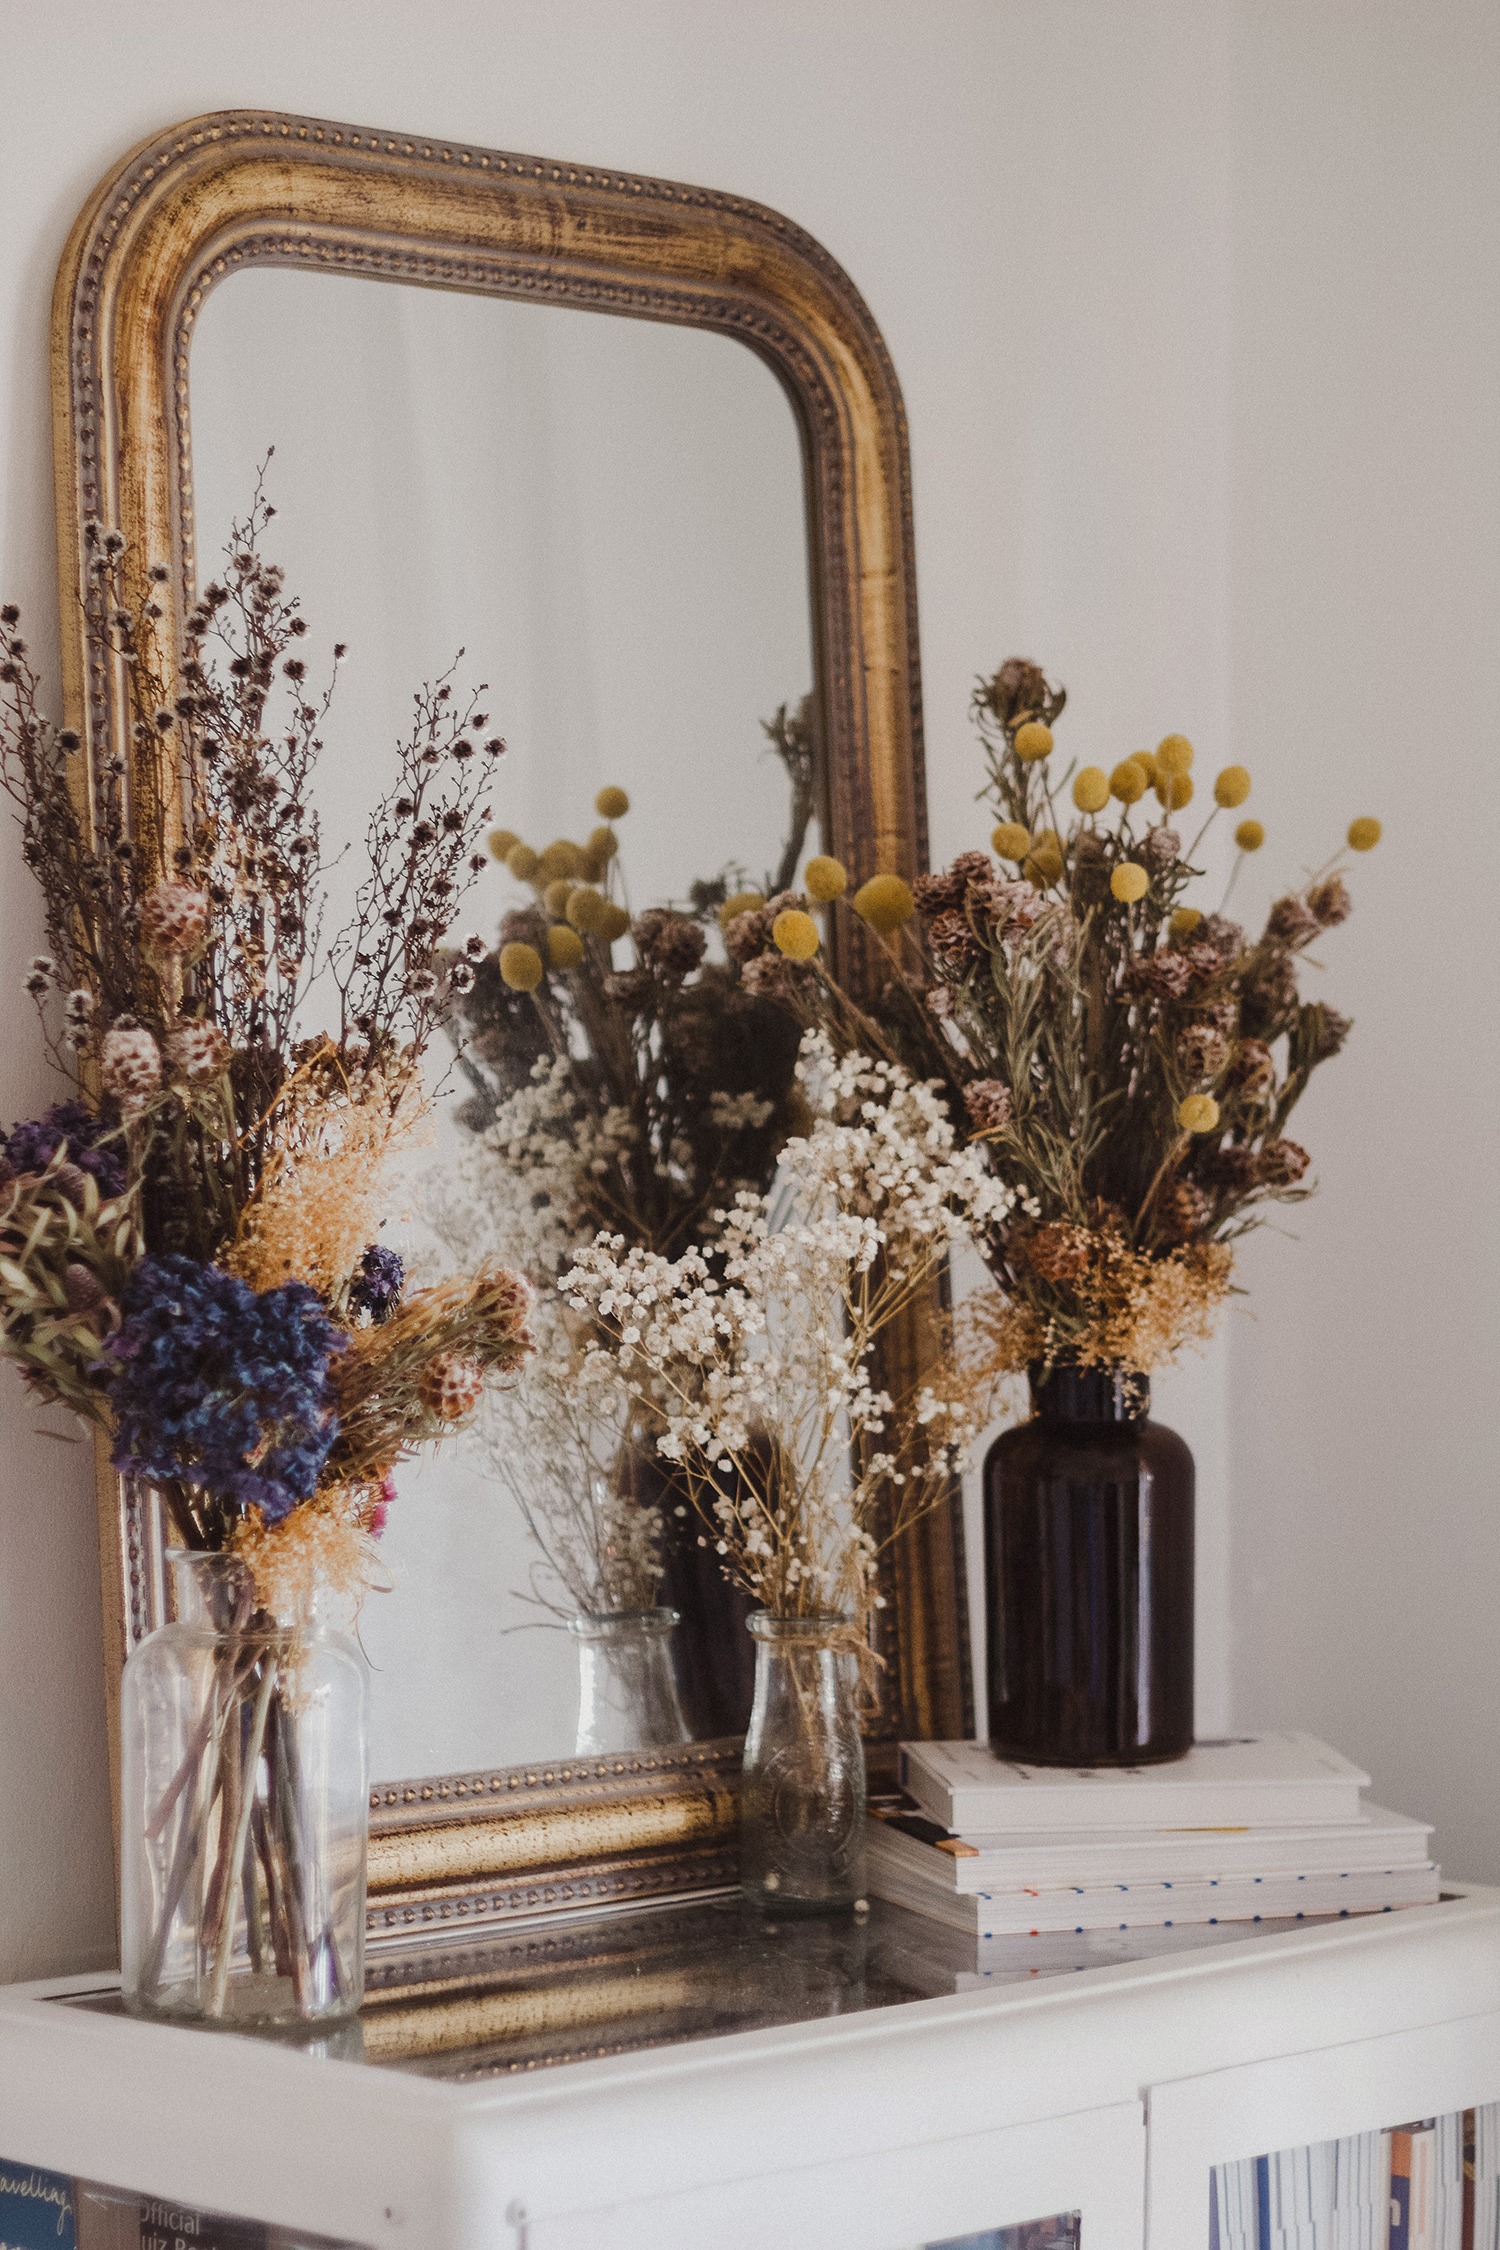 where to buy dried flowers online - bouquets of dried florals sitting in vases on a mantle